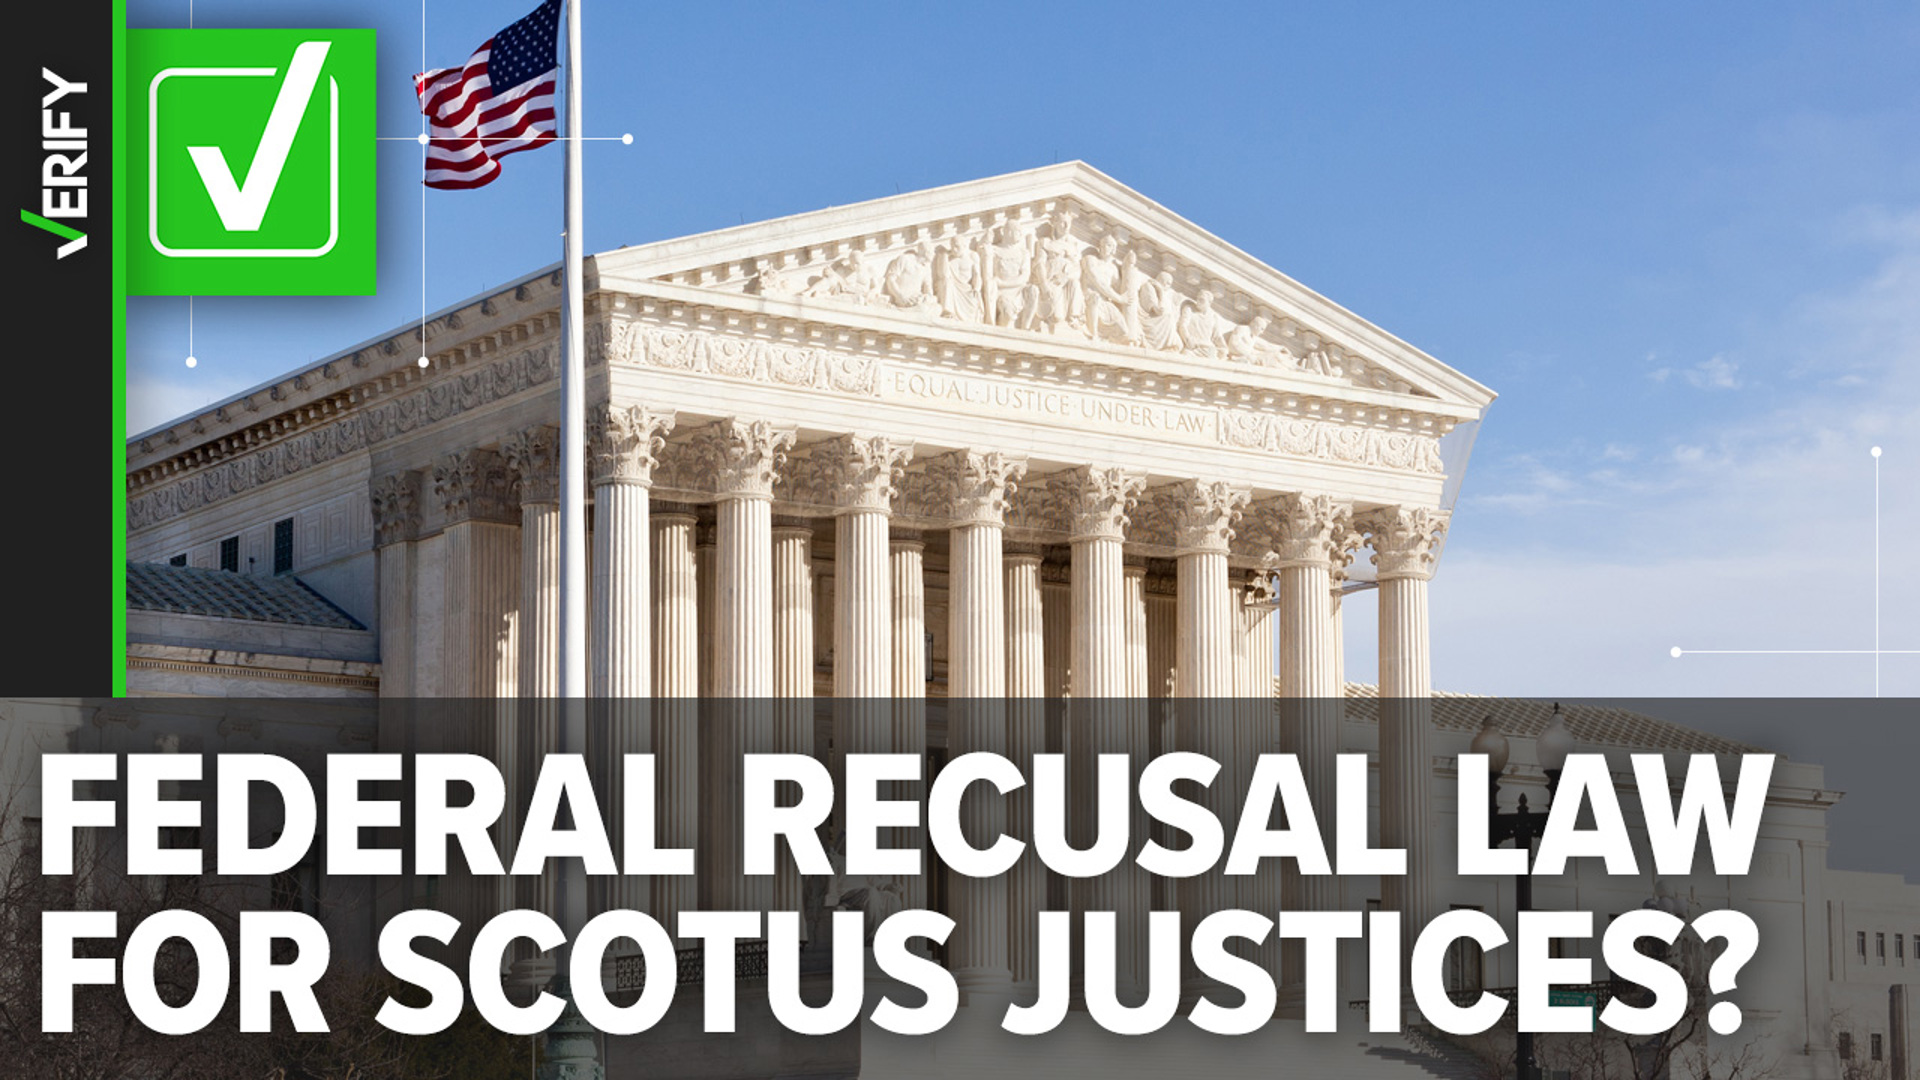 Supreme Court justices are required to sit out cases where they may appear impartial, and often do. But it’s unclear whether they can be forced to.